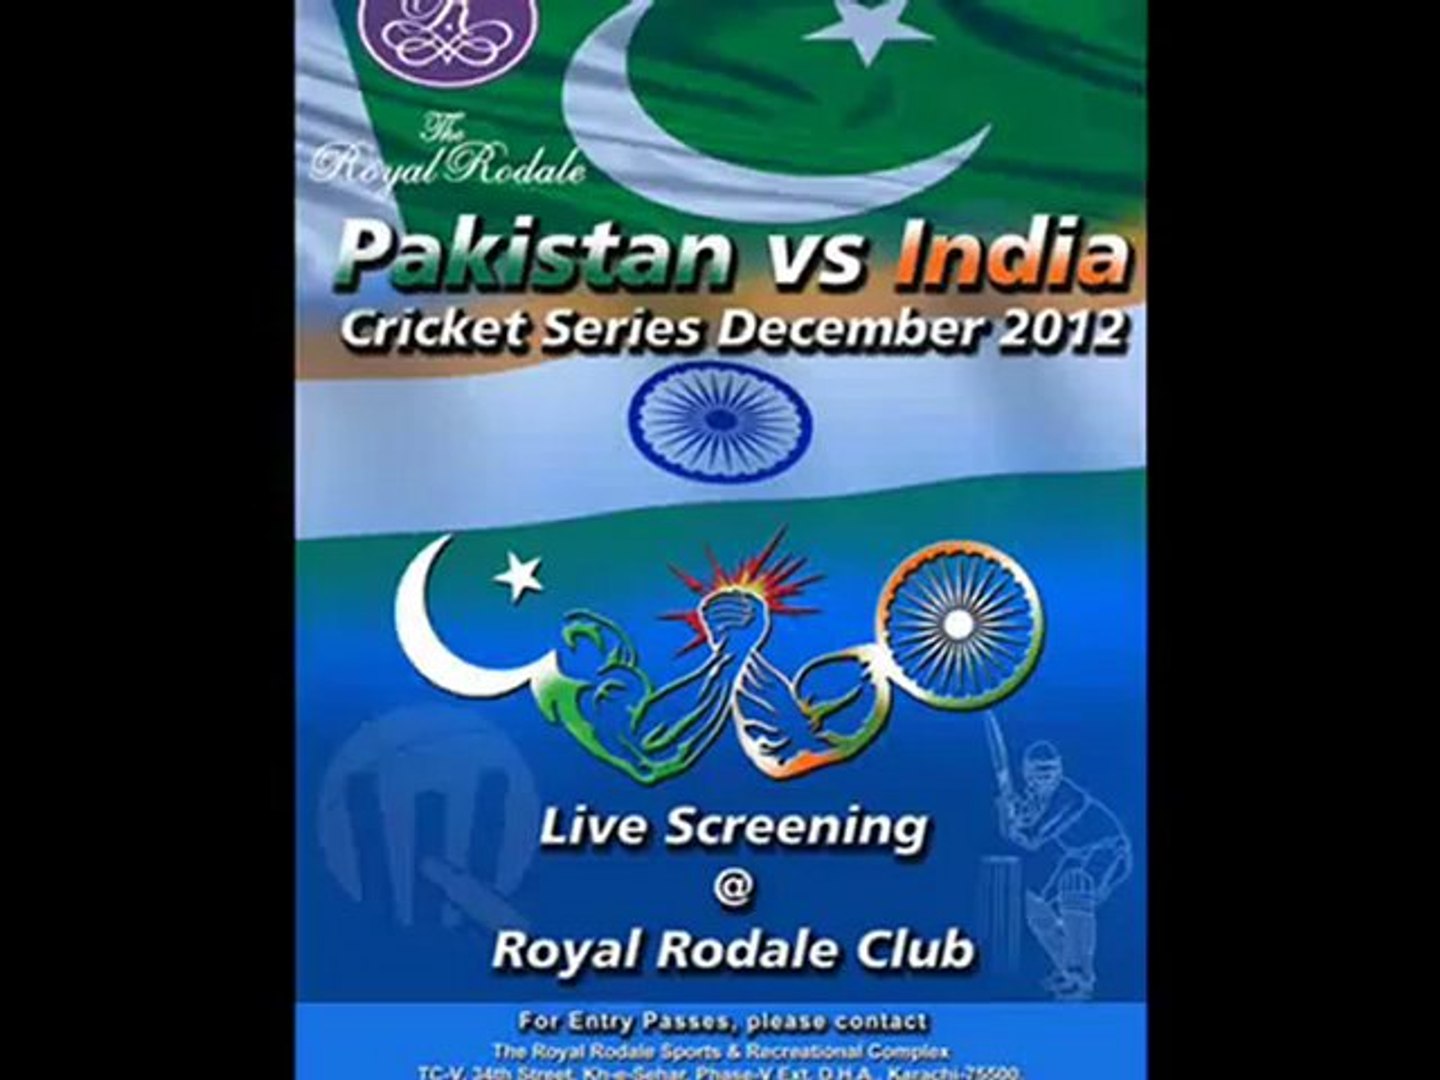 watching the live Tour match pak vs ind